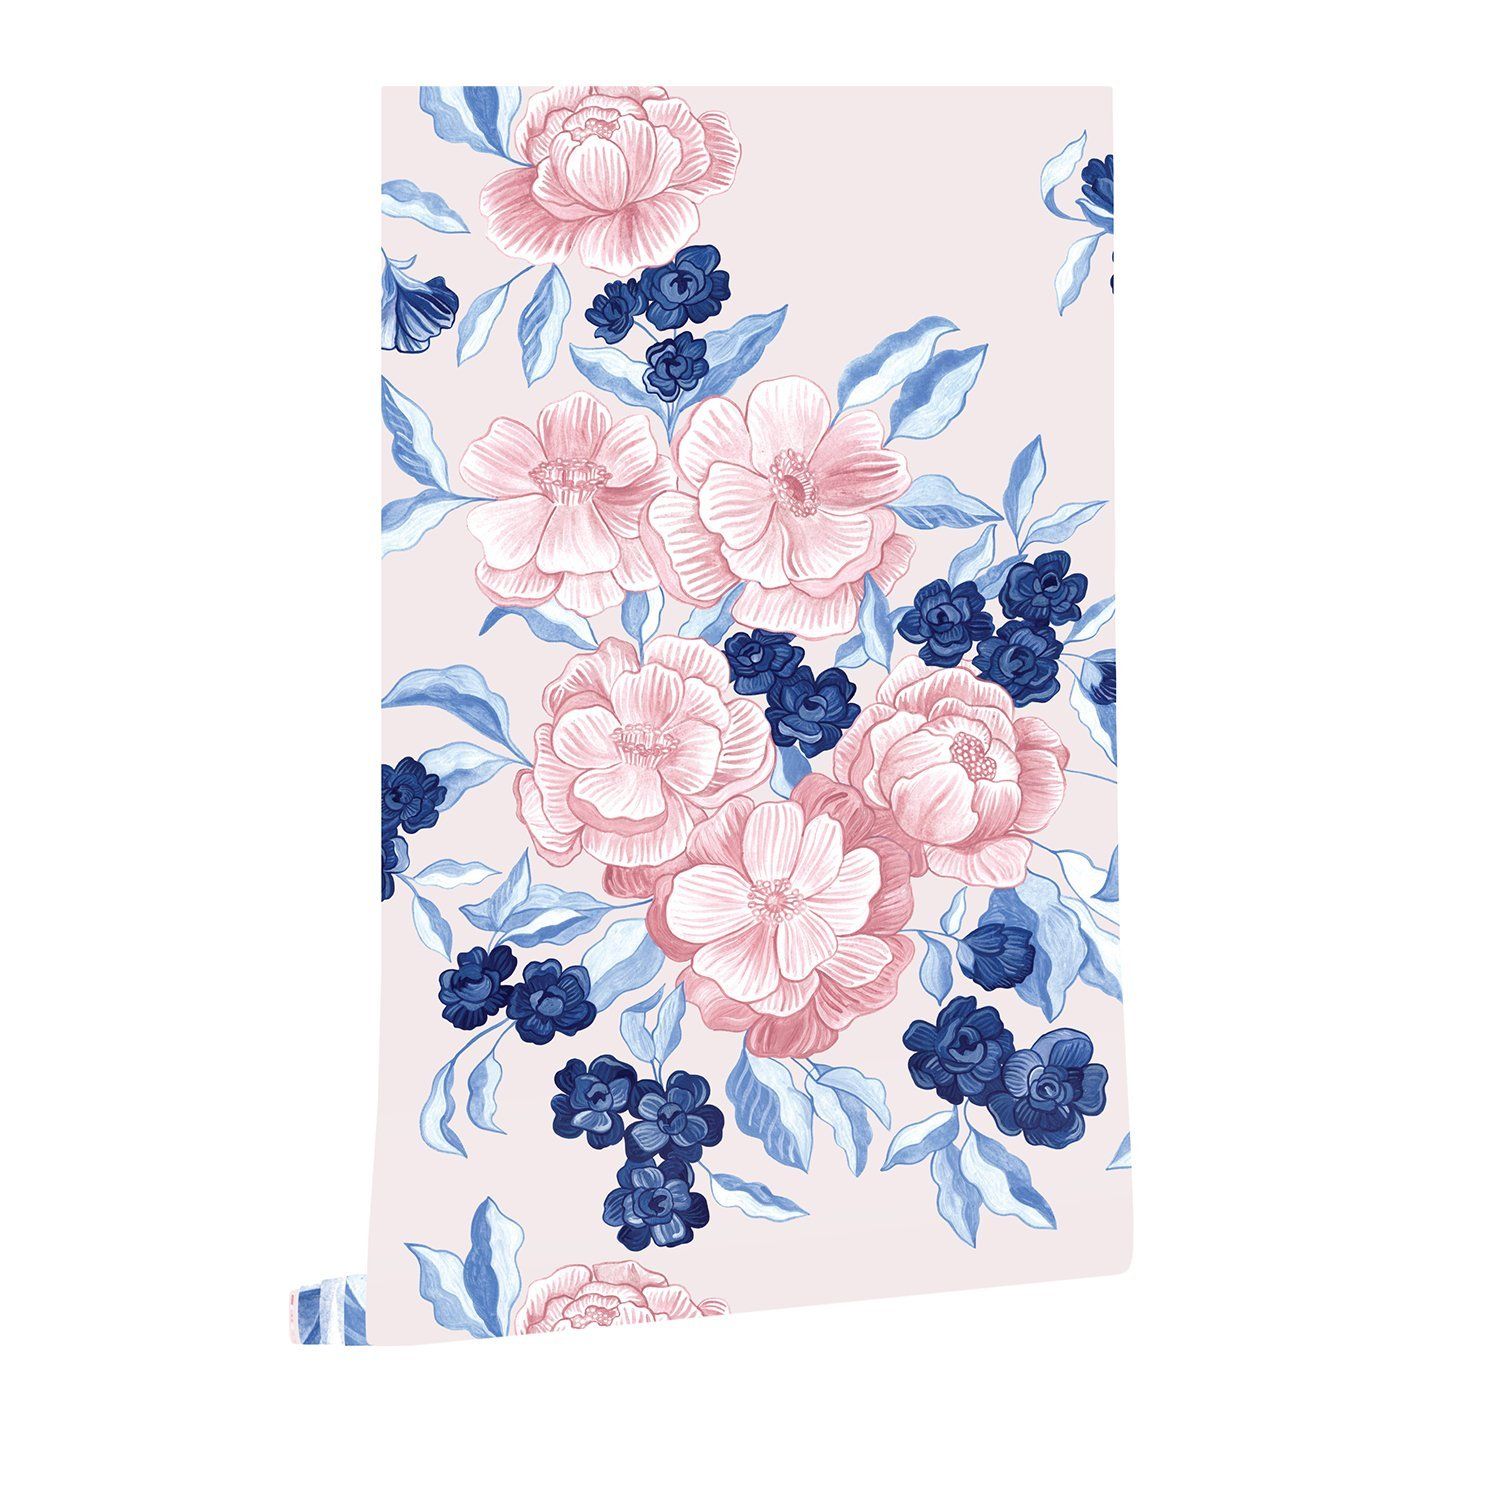 Bows  Blossoms what more could a little girl want in a wallpaper  This darling new Cait Kids print is such a crowd pleaser were  Instagram